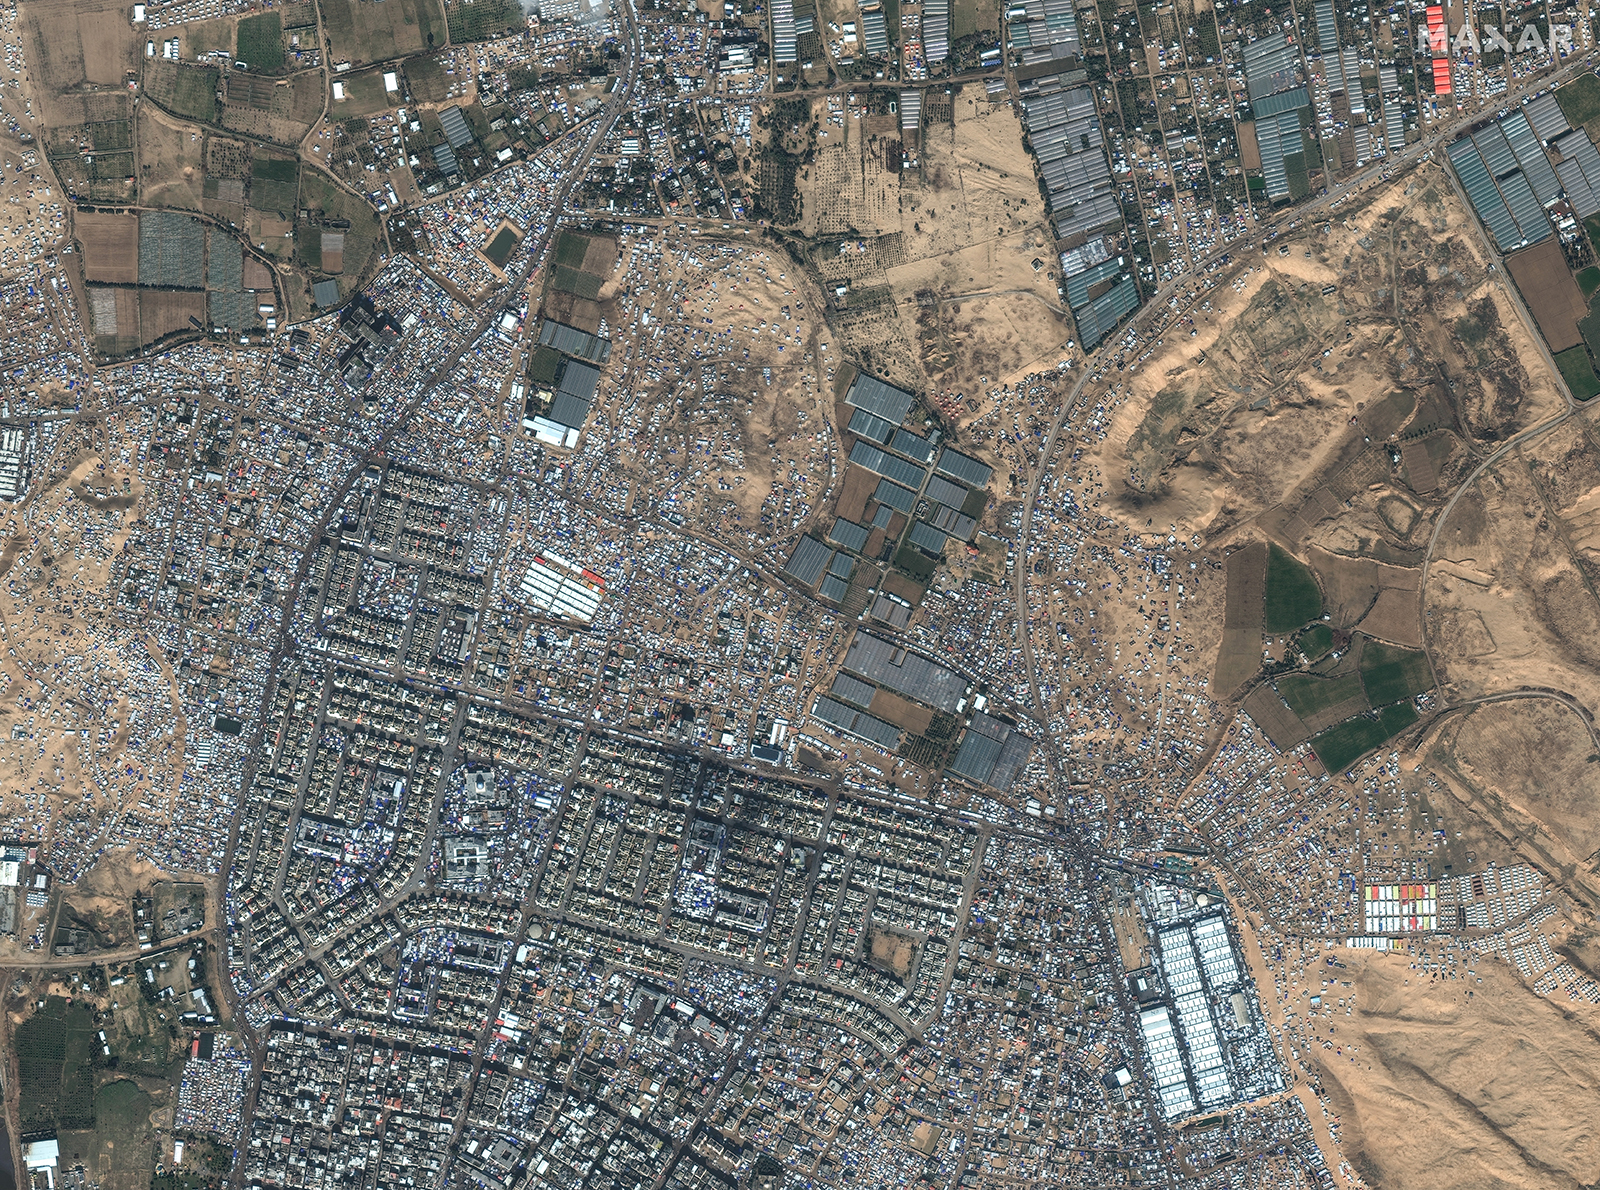 This satellite image shows a makeshift tent city in Rafah.